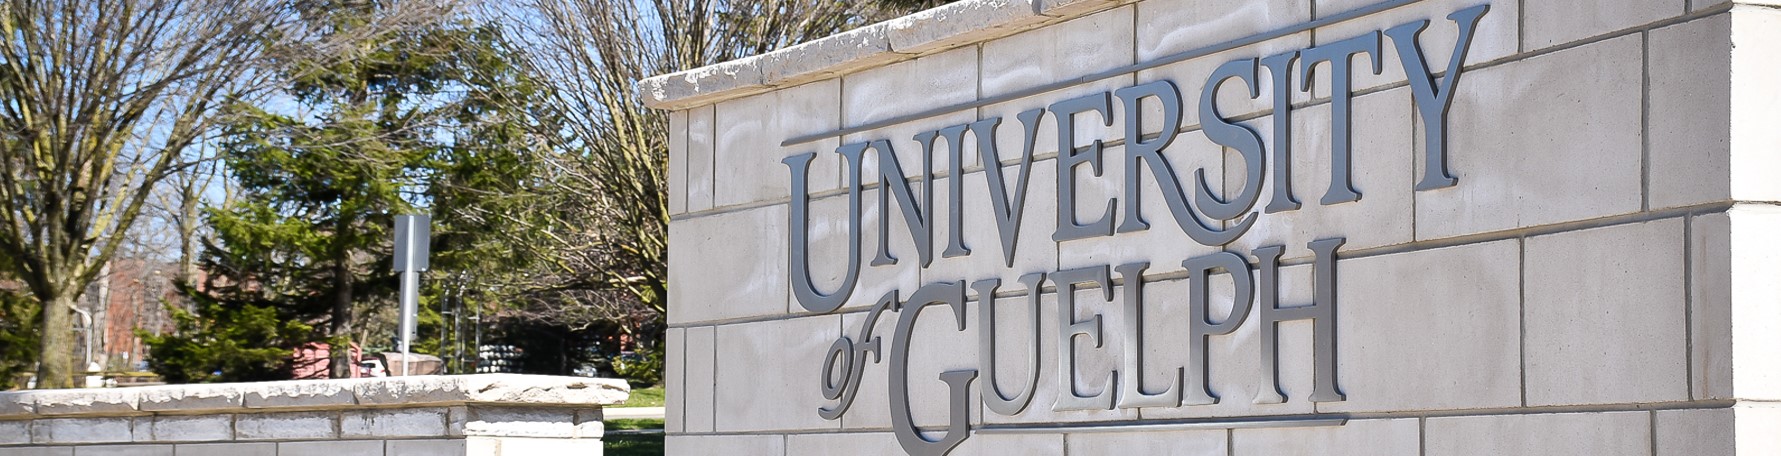 The University of Guelph front entrance sign